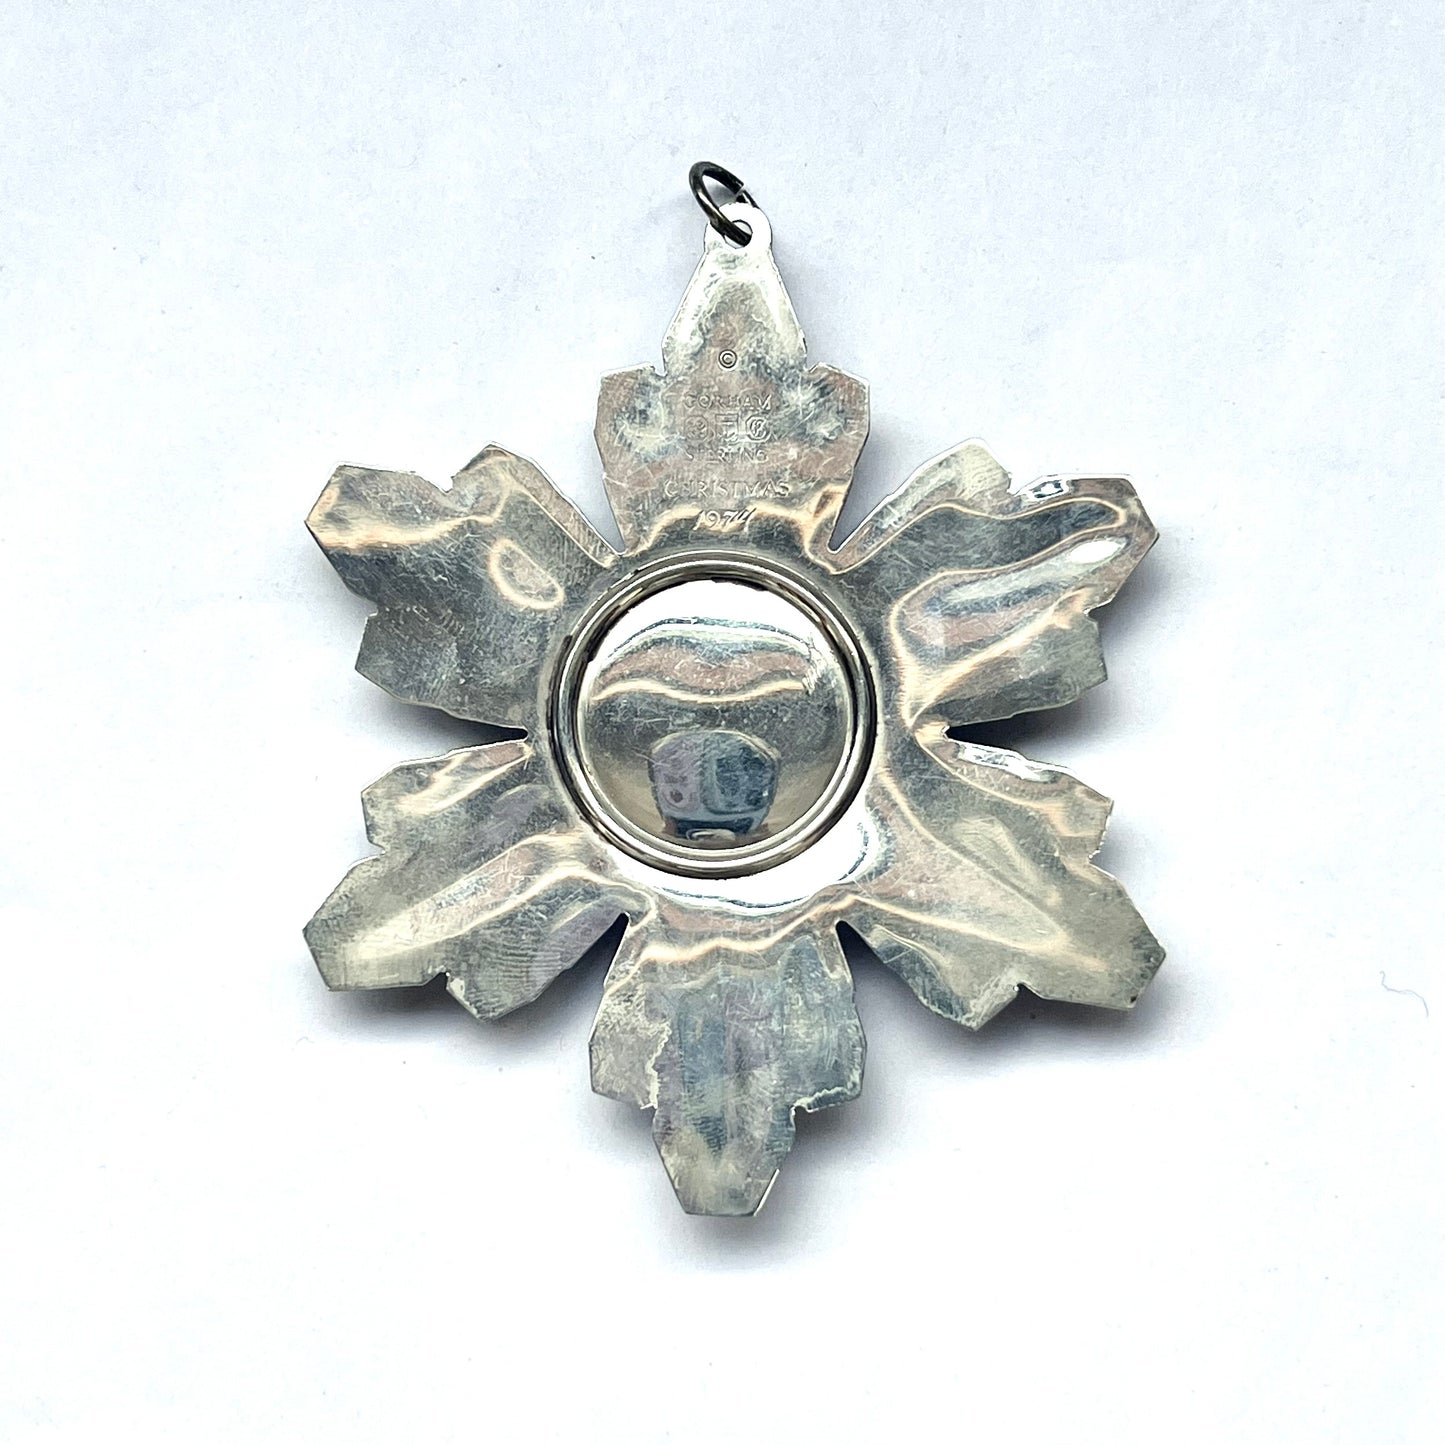 #1- Vintage Sterling Silver 1970s Figural Snowflake Ornament by Gorham